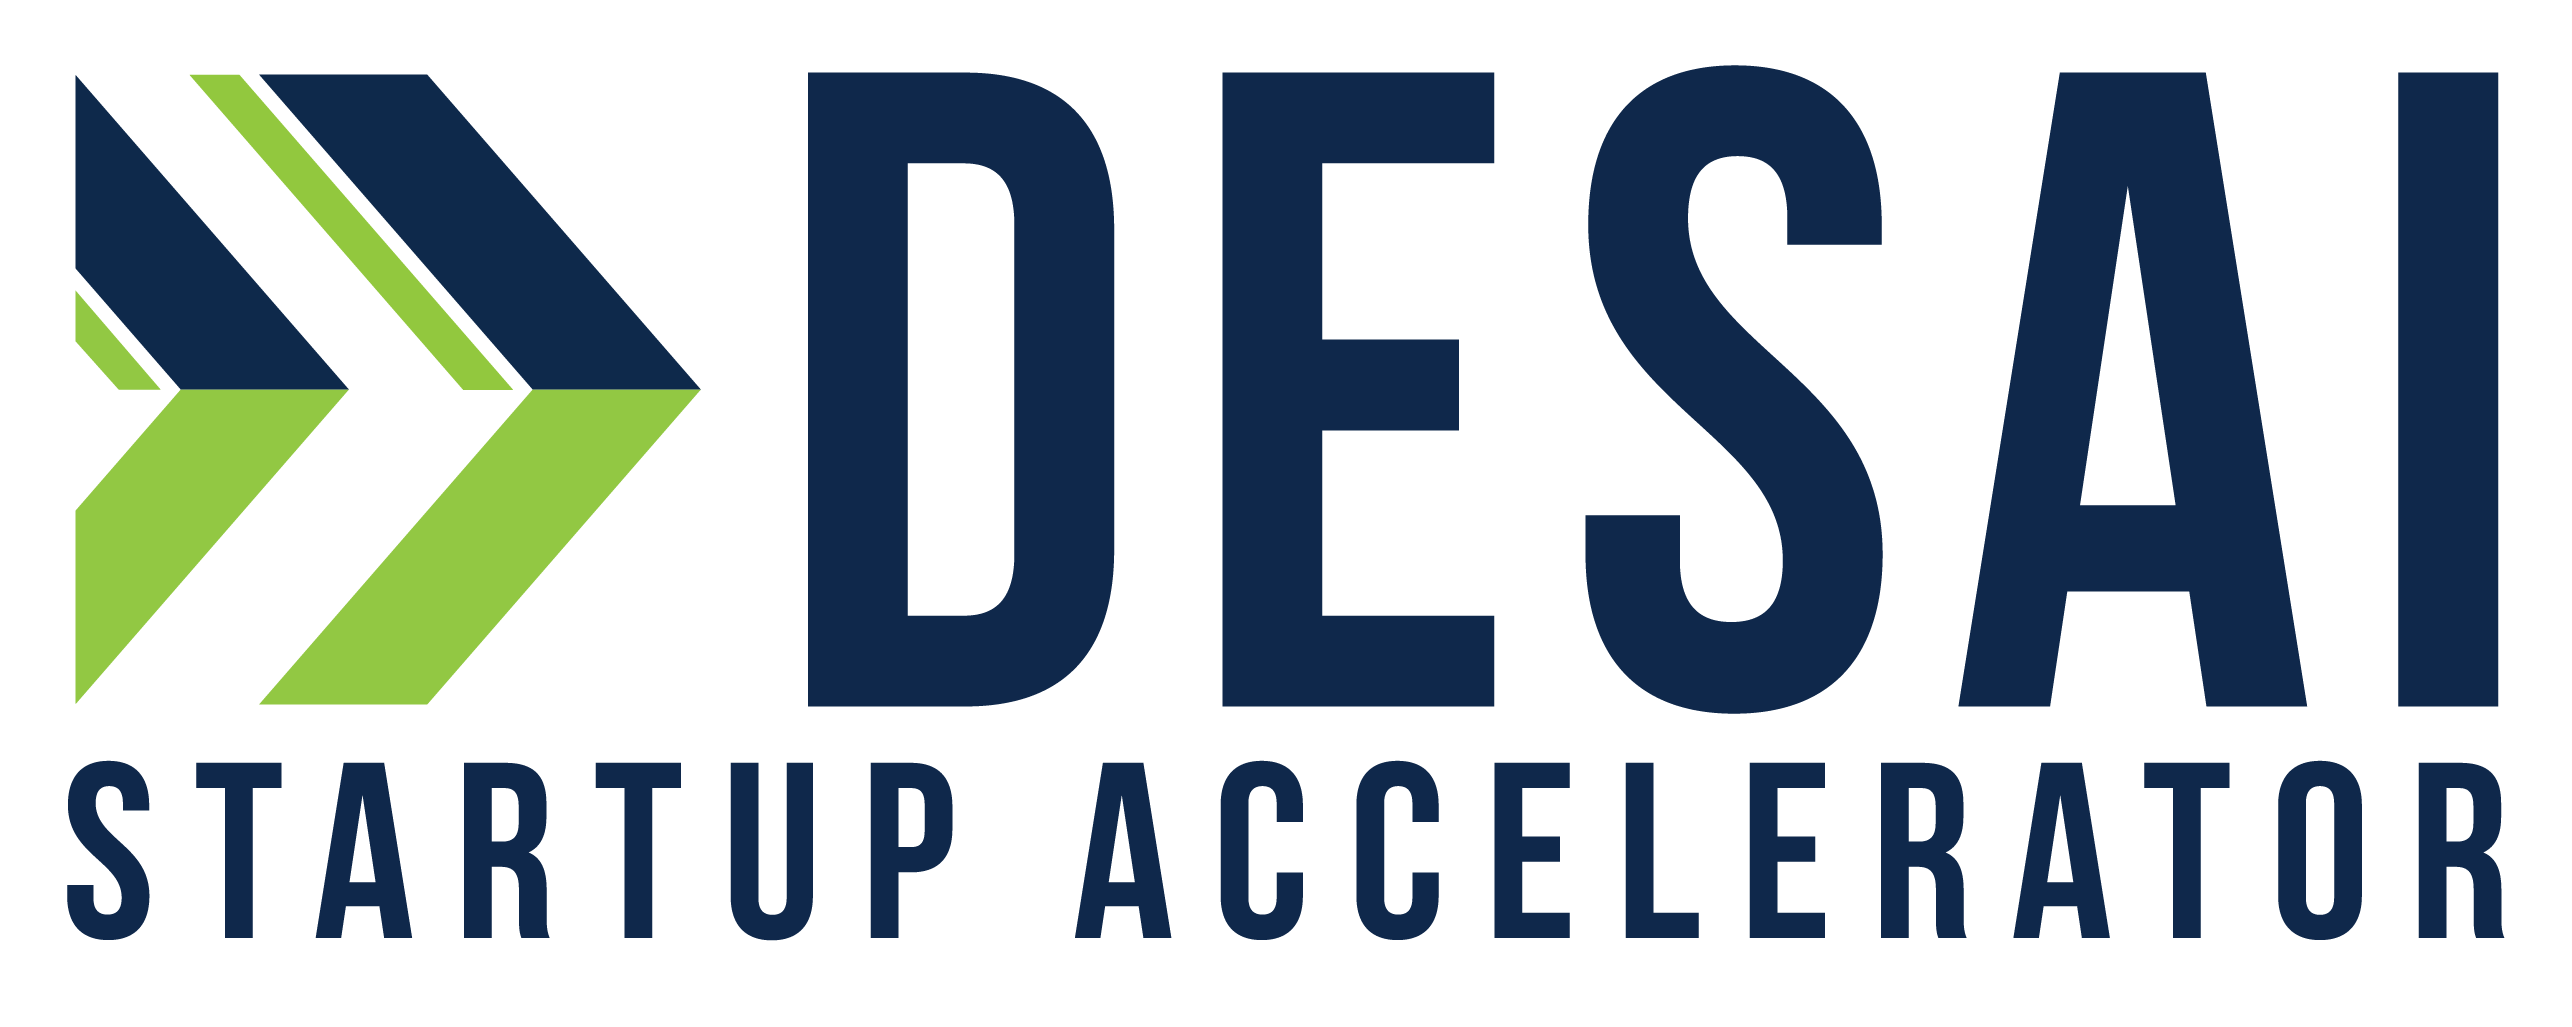 Logo with "Desai" in large blue font and "startup accelerator" in smaller font. Blue and green double chevron icon.